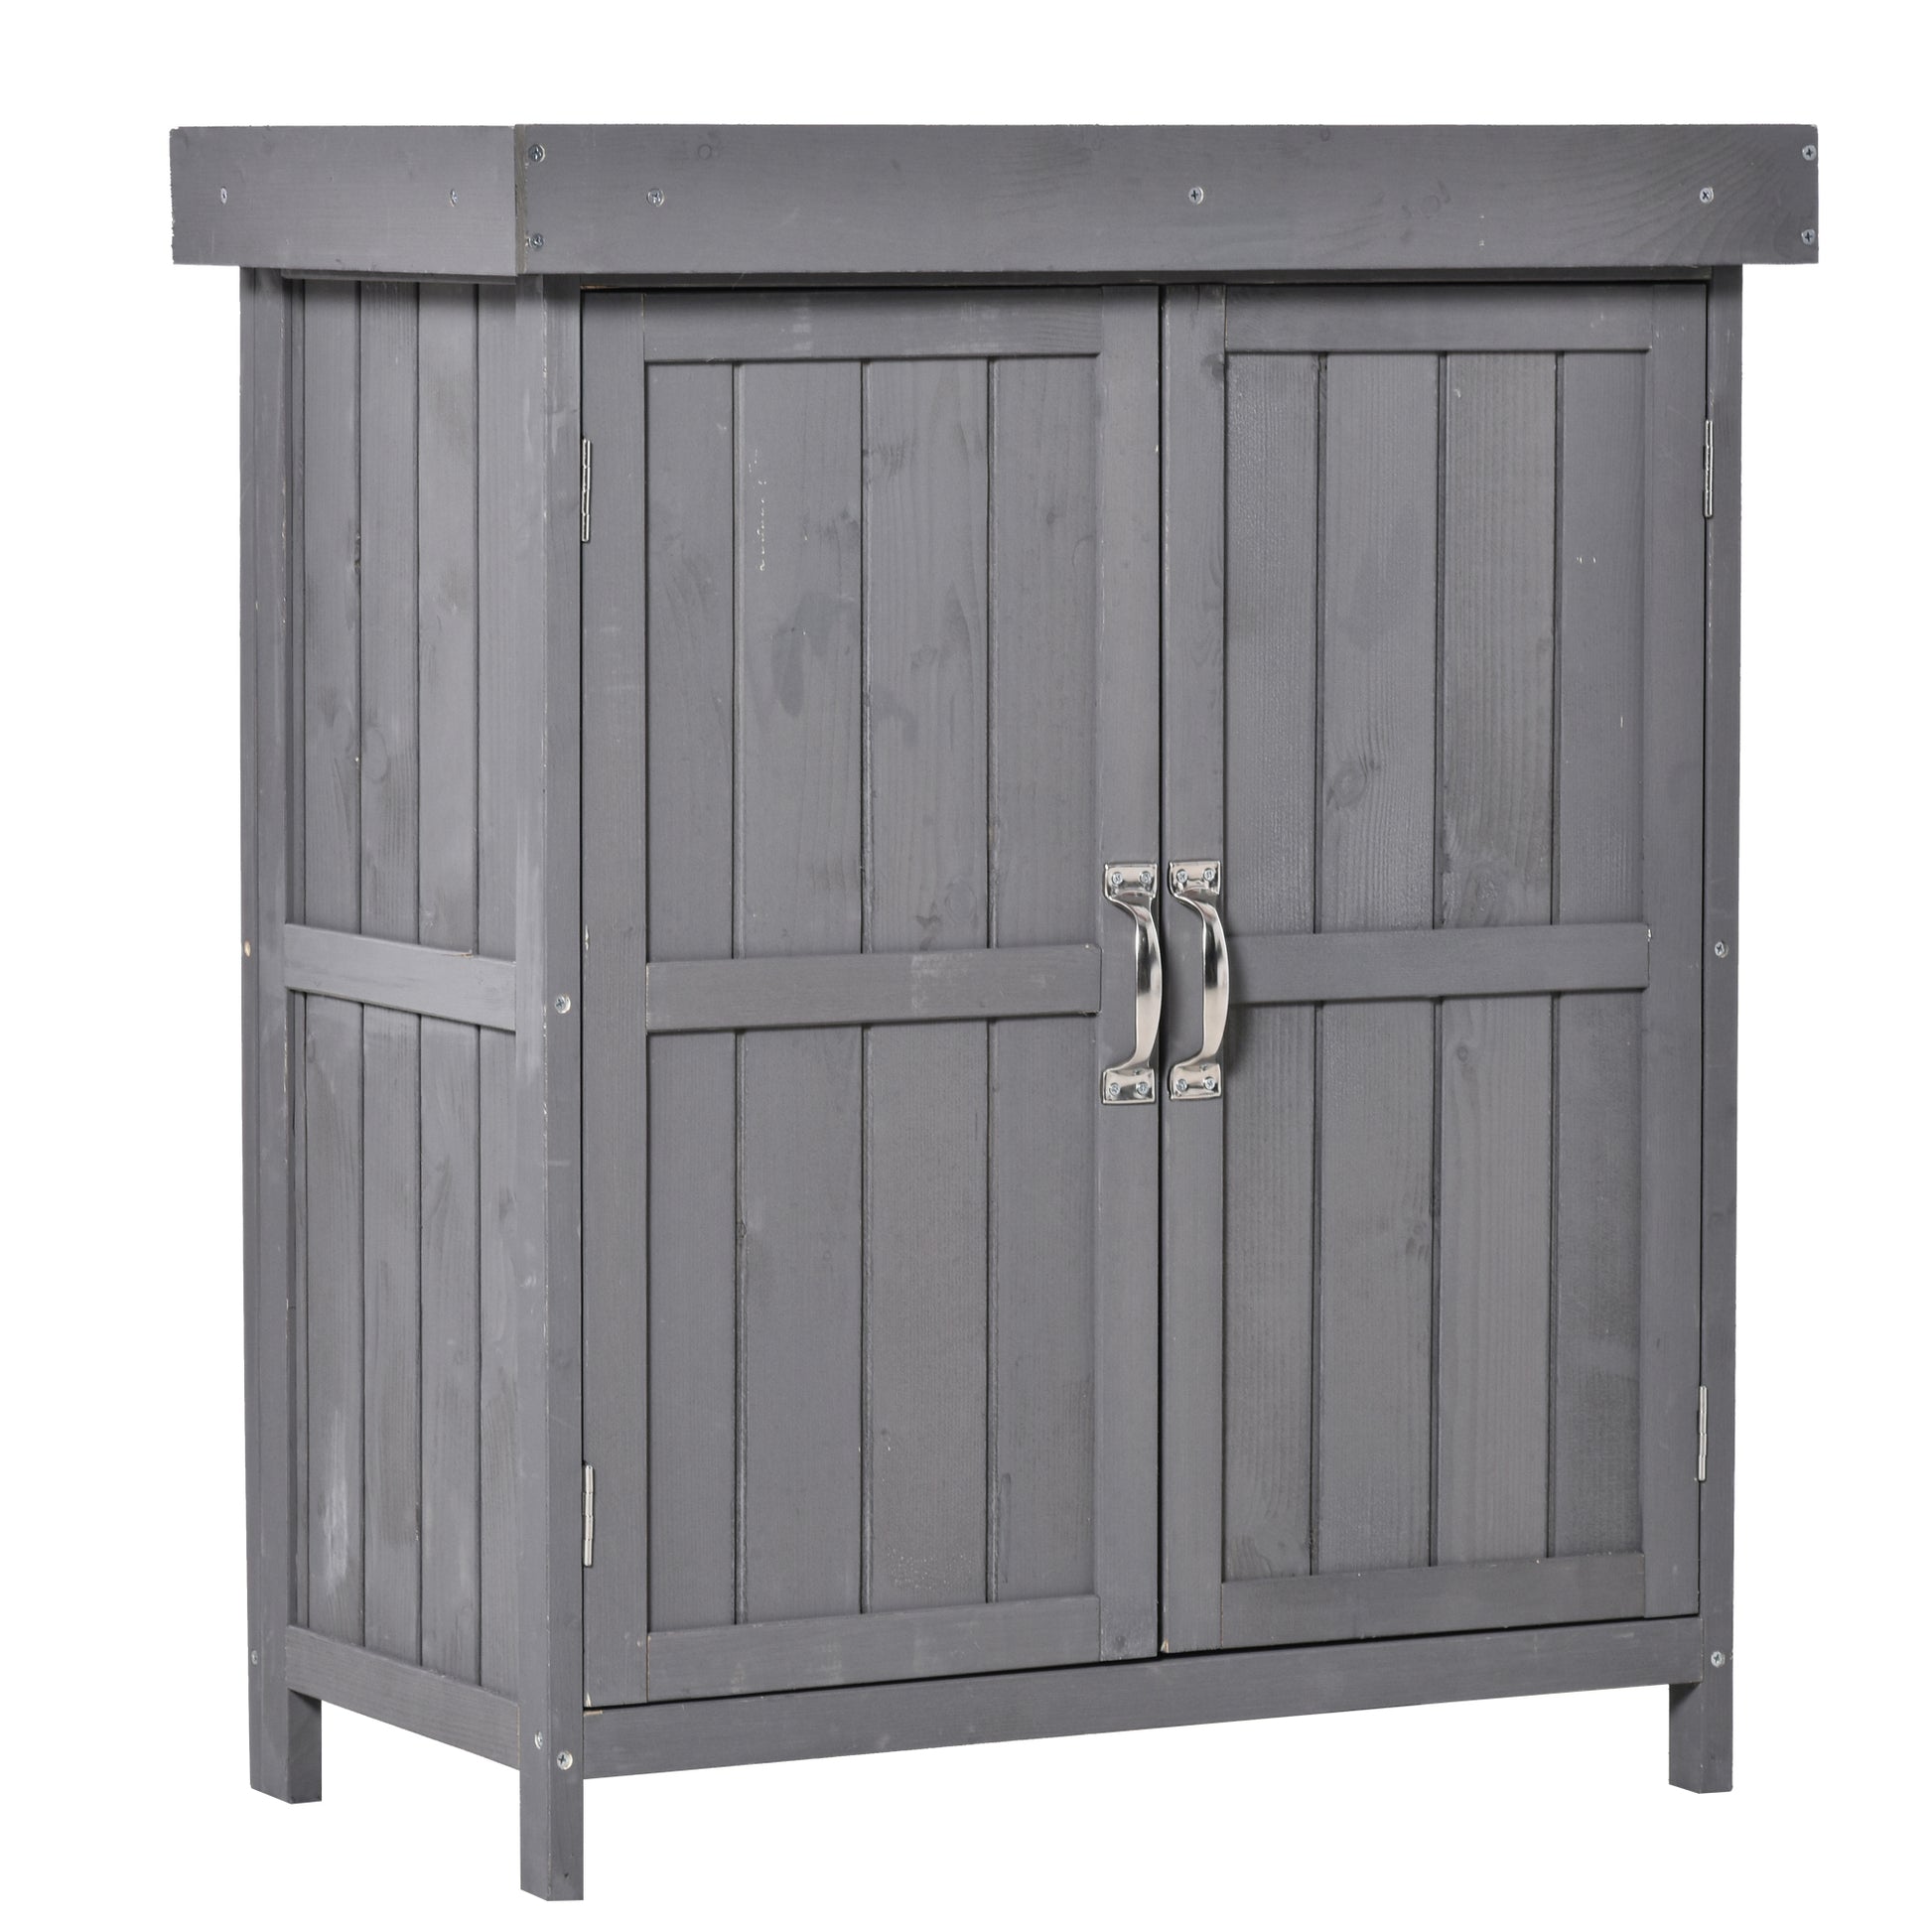 Outsunny Wooden Garden Storage Shed Tool Cabinet Organiser with Shelves, Two Doors,74 x 43 x 88cm, Grey - OutdoorBox